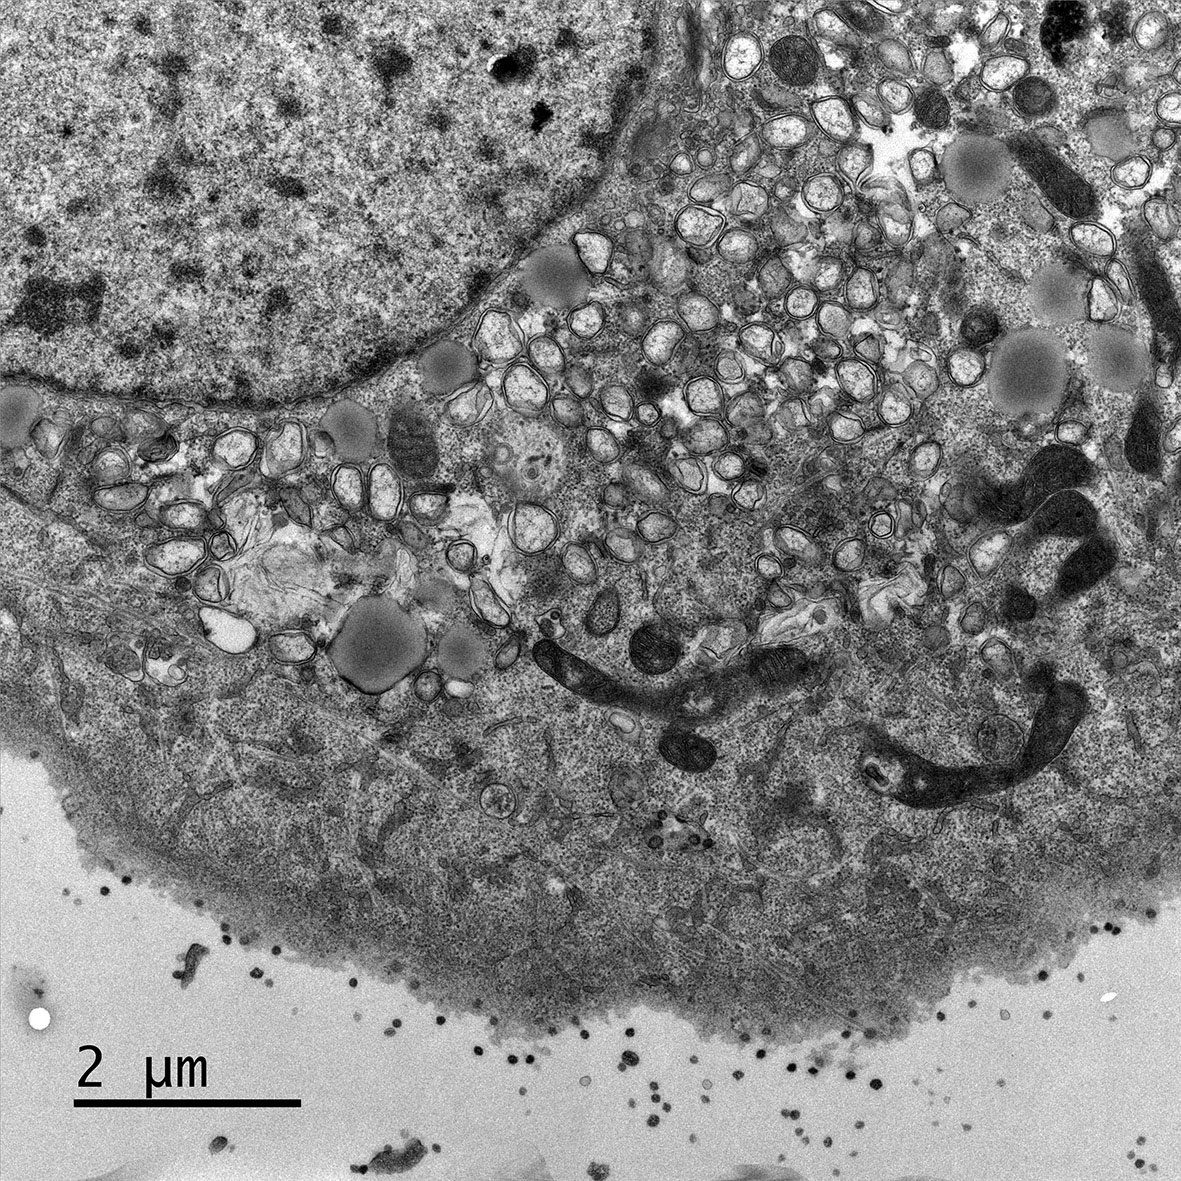 Electron micrograph of Vero E6 cells infected with SARS-CoV-2, 8 h post infection. Viral replication organelles. These virus-induced structures accumulate in large clusters in the perinuclear region and primarily contain double-membrane vesicles (DMVs).  See Ogando et al., “SARS-Coronavirus-2 Replication in Vero E6 Cells: Replication Kinetics, Rapid Adaptation, and Cytopathology.” 2020. J. Gen. Virol. doi: 10.1099/jgv.0.001453 PMID 32568027. Courtesy of Ronald Limpens, Montse Bárcena and Eric Snijder, Leiden University Medical Center, the Netherlands.